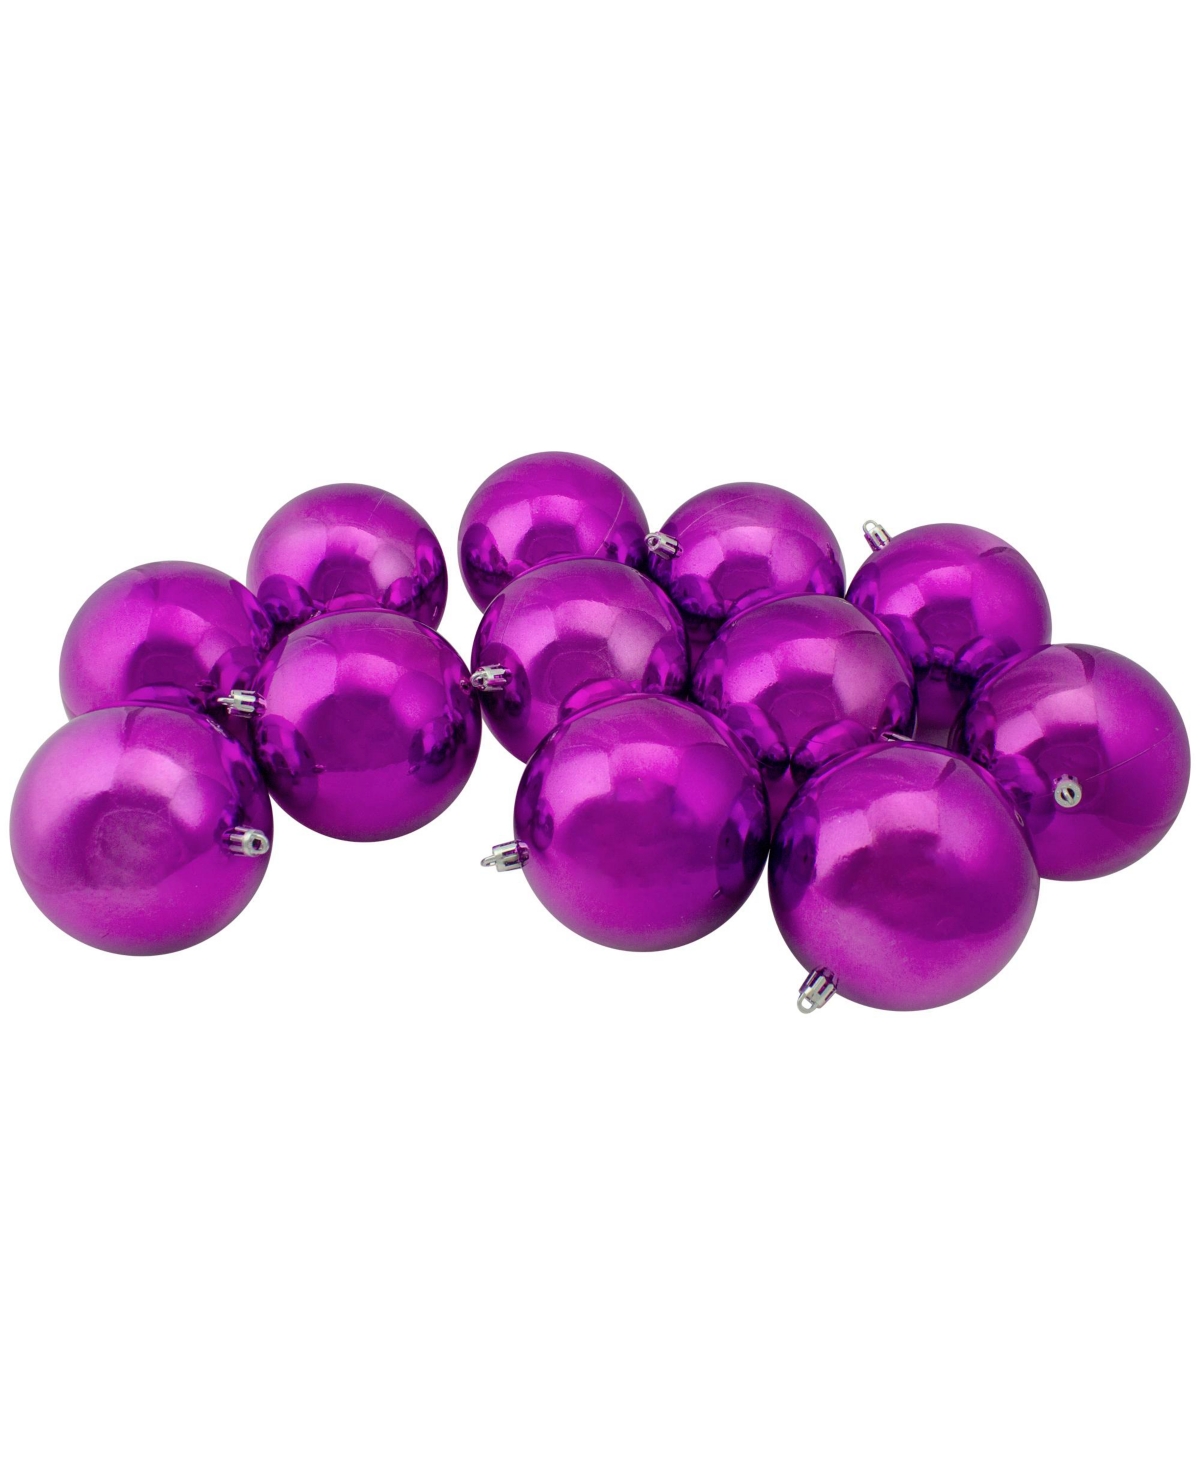 Northlight 12 Count Shatterproof Shiny Christmas Ball Ornaments 100mm Set, 4" In Pink